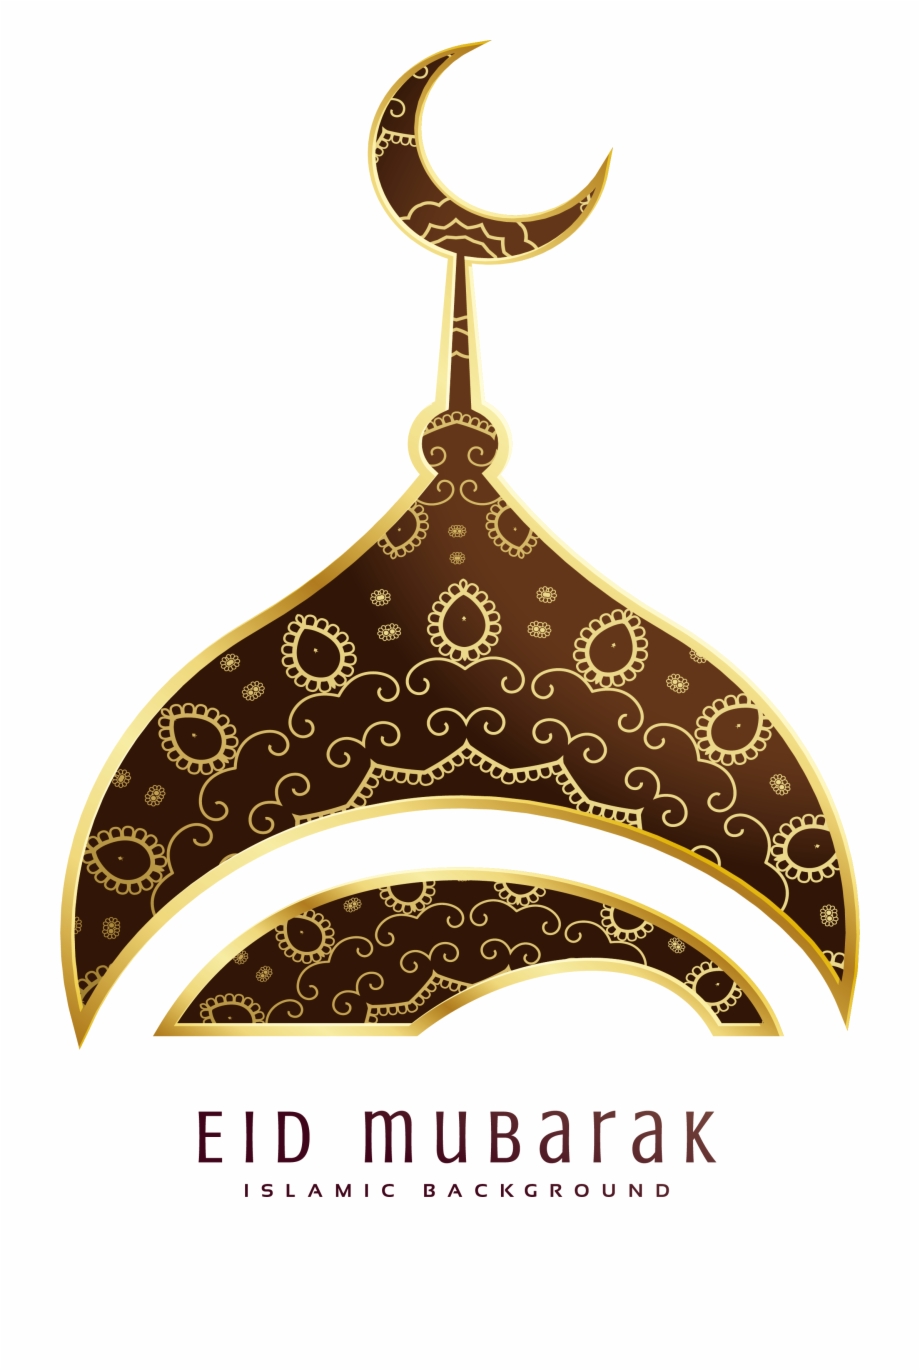 How To Download New Eid Backgrounds And Eid